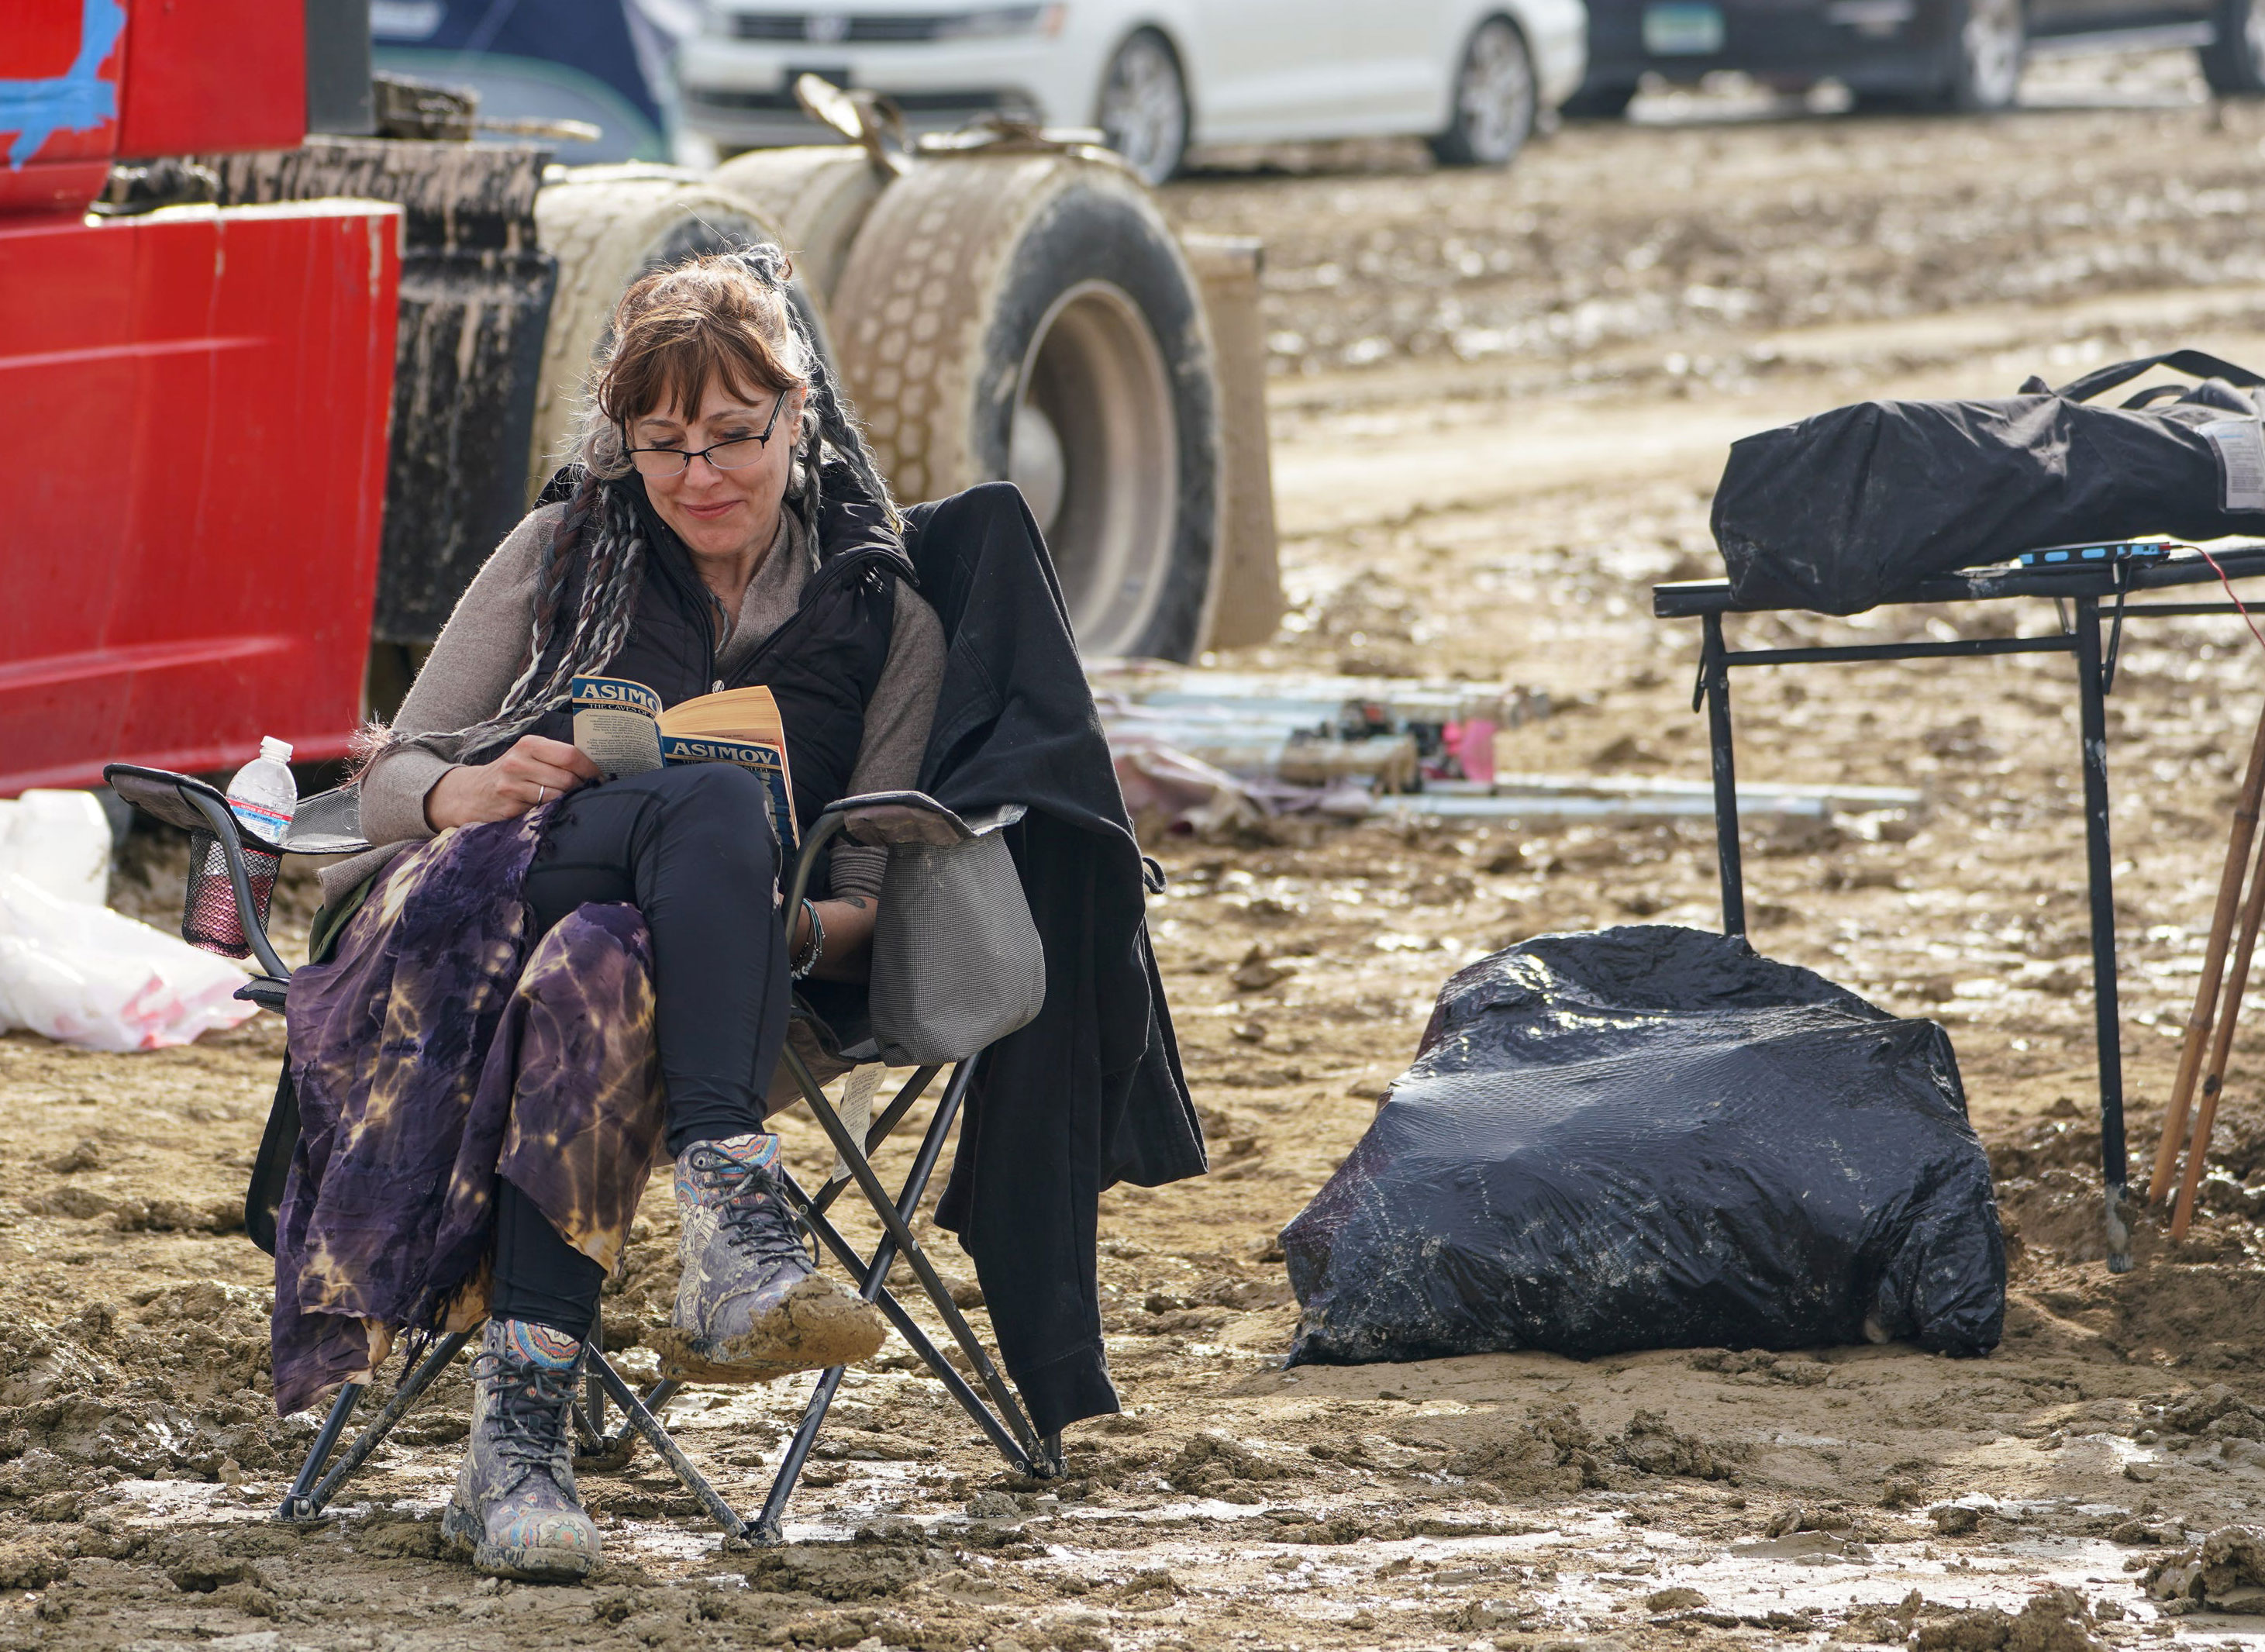 Barbara Wahl reads a book to pass time while waiting to leave Burning Man on Sunday, September 3. 